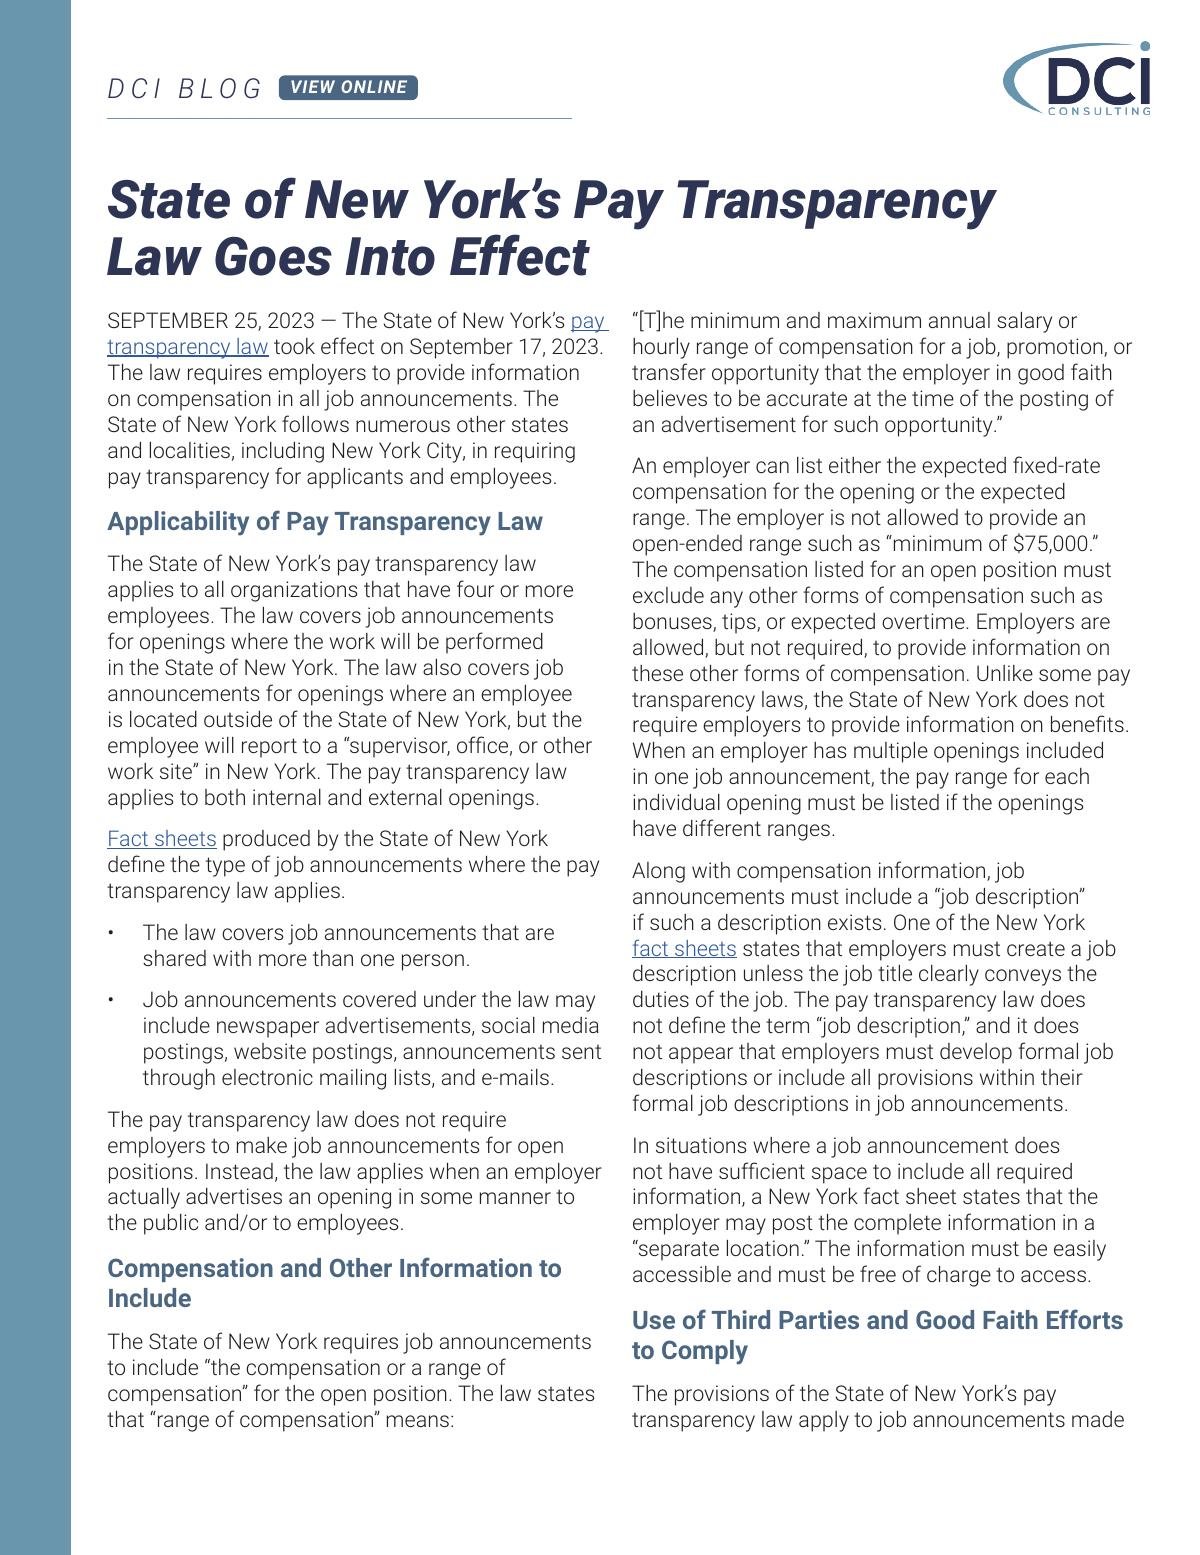 State of New York's Pay Transparency Law Goes Into Effect